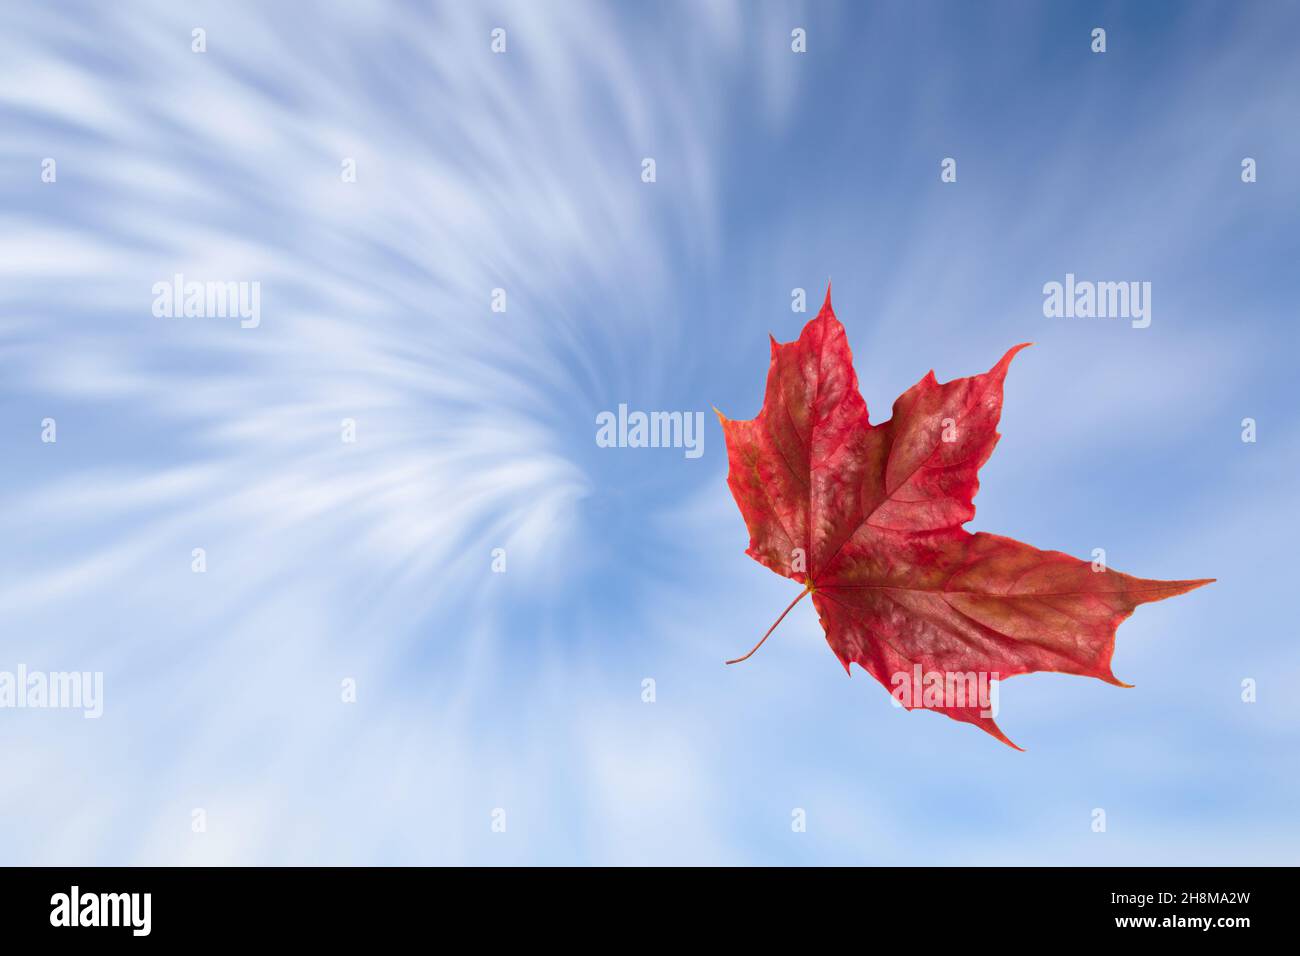 Red autumn maple leaf falling against the swirling sky Stock Photo